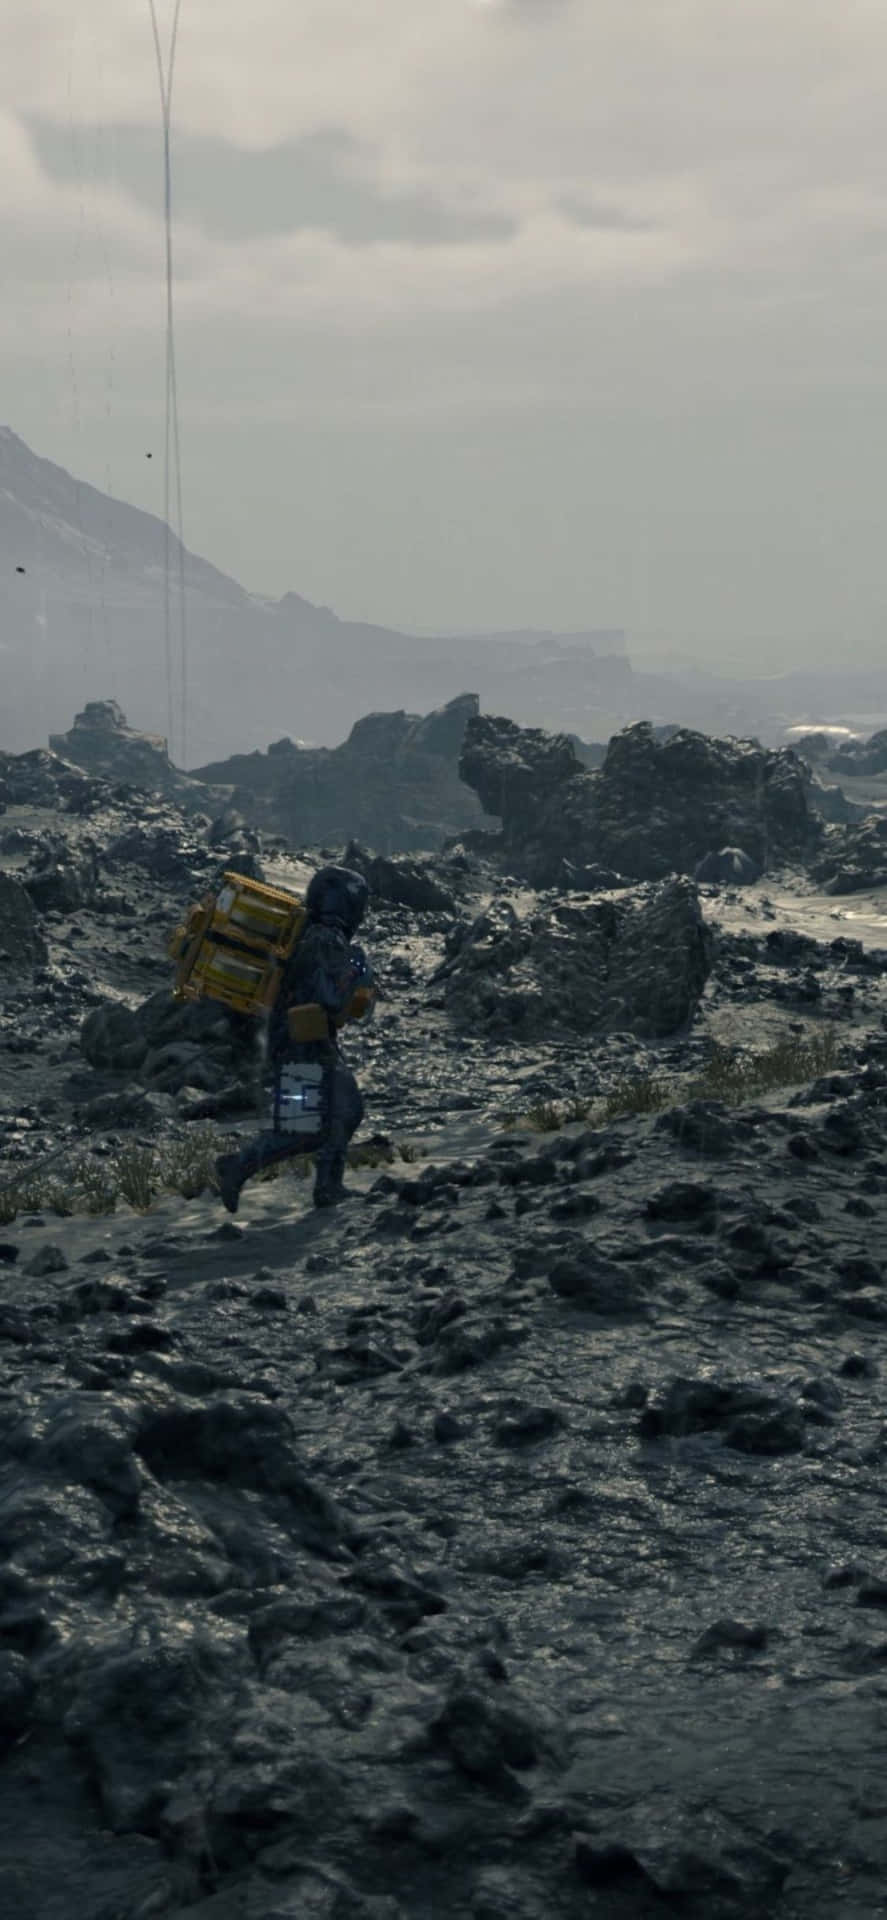 'Explore the post-apocalyptic world of Death Stranding on your Iphone X!'